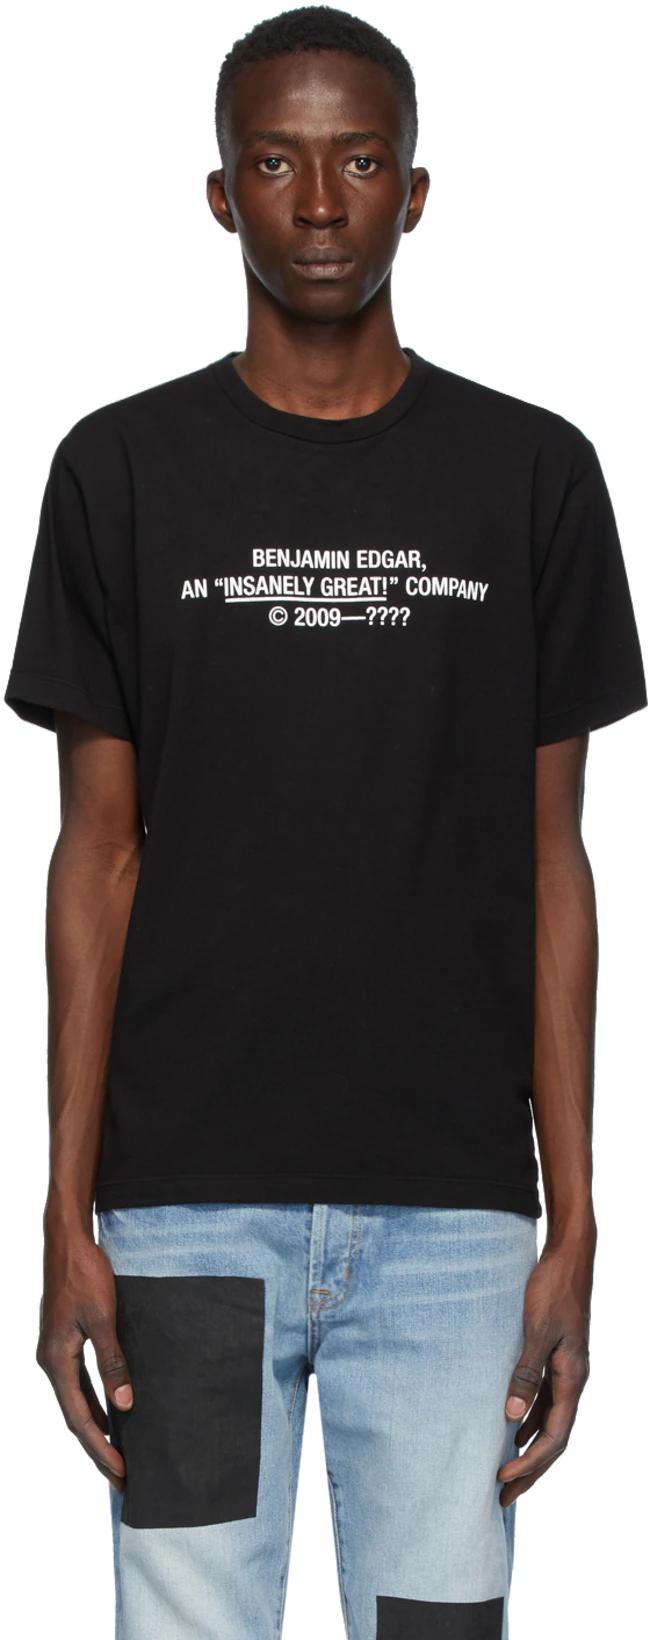 SSENSE Exclusive Black 'Insanely Great' T-Shirt by BENJAMIN EDGAR